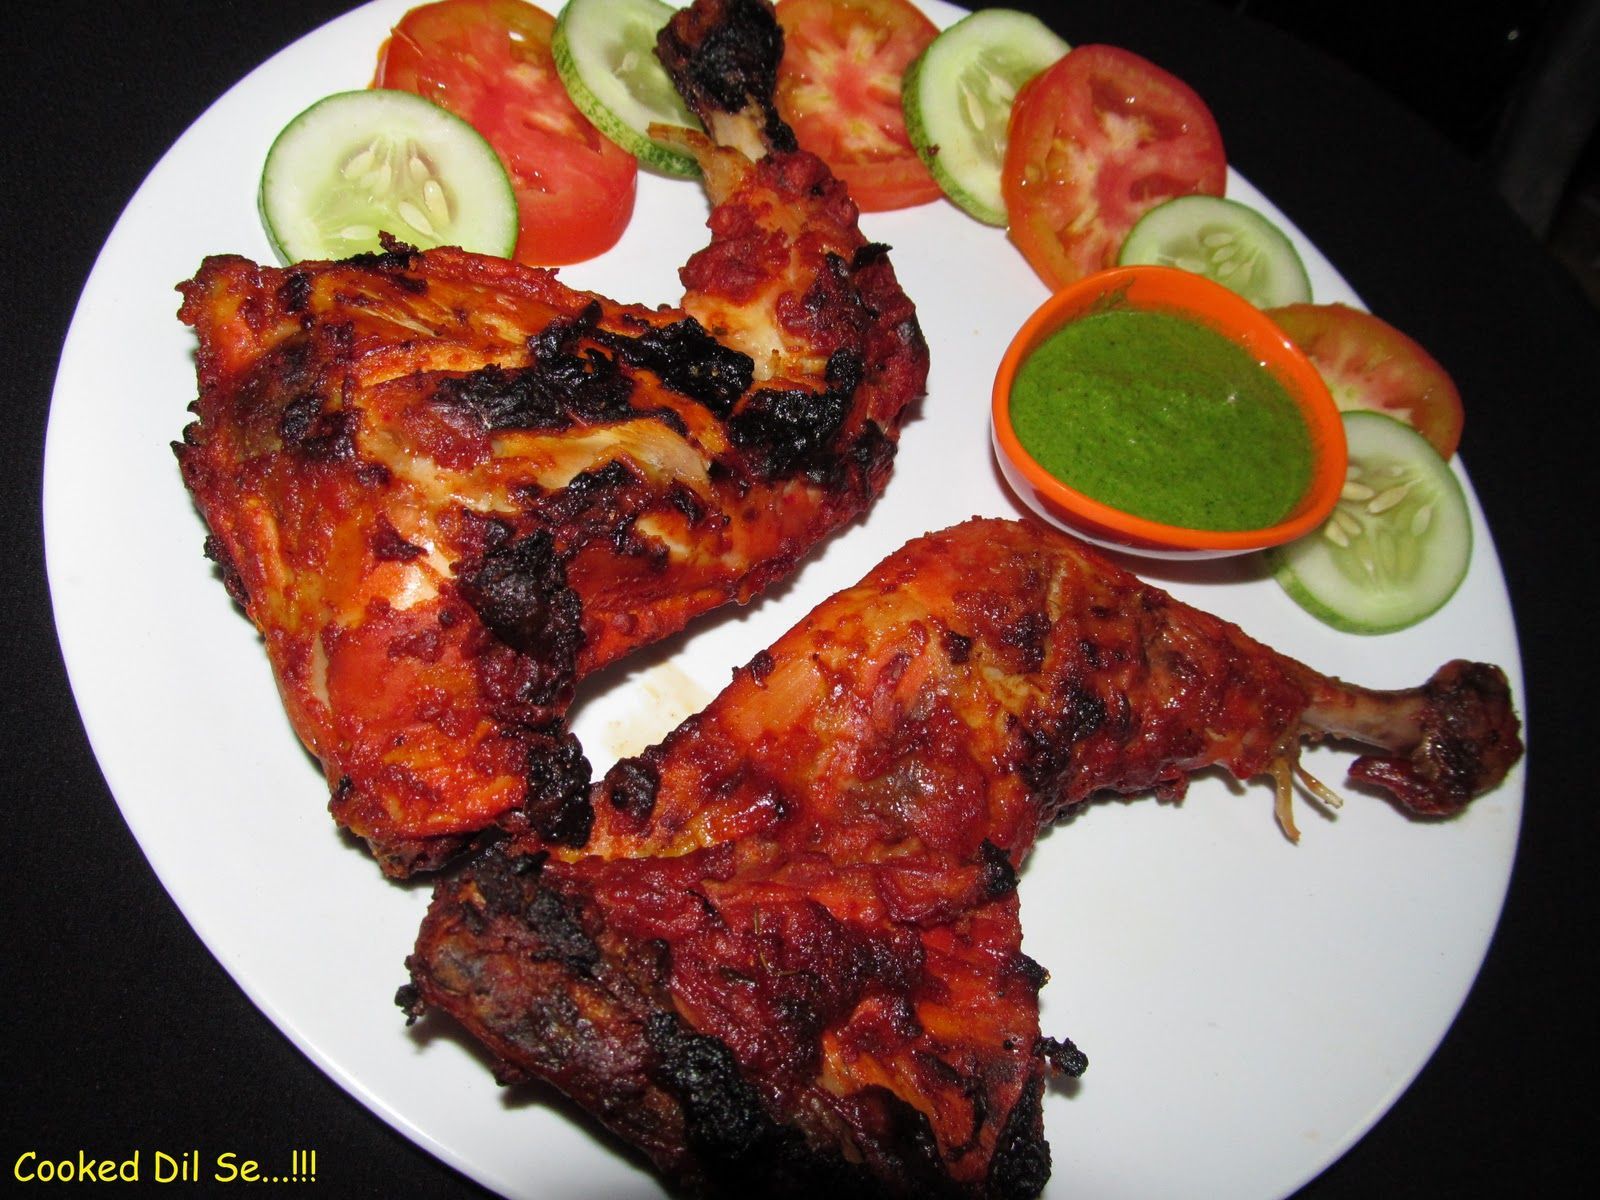 Chicken tandoori Images - Search Images on Everypixel